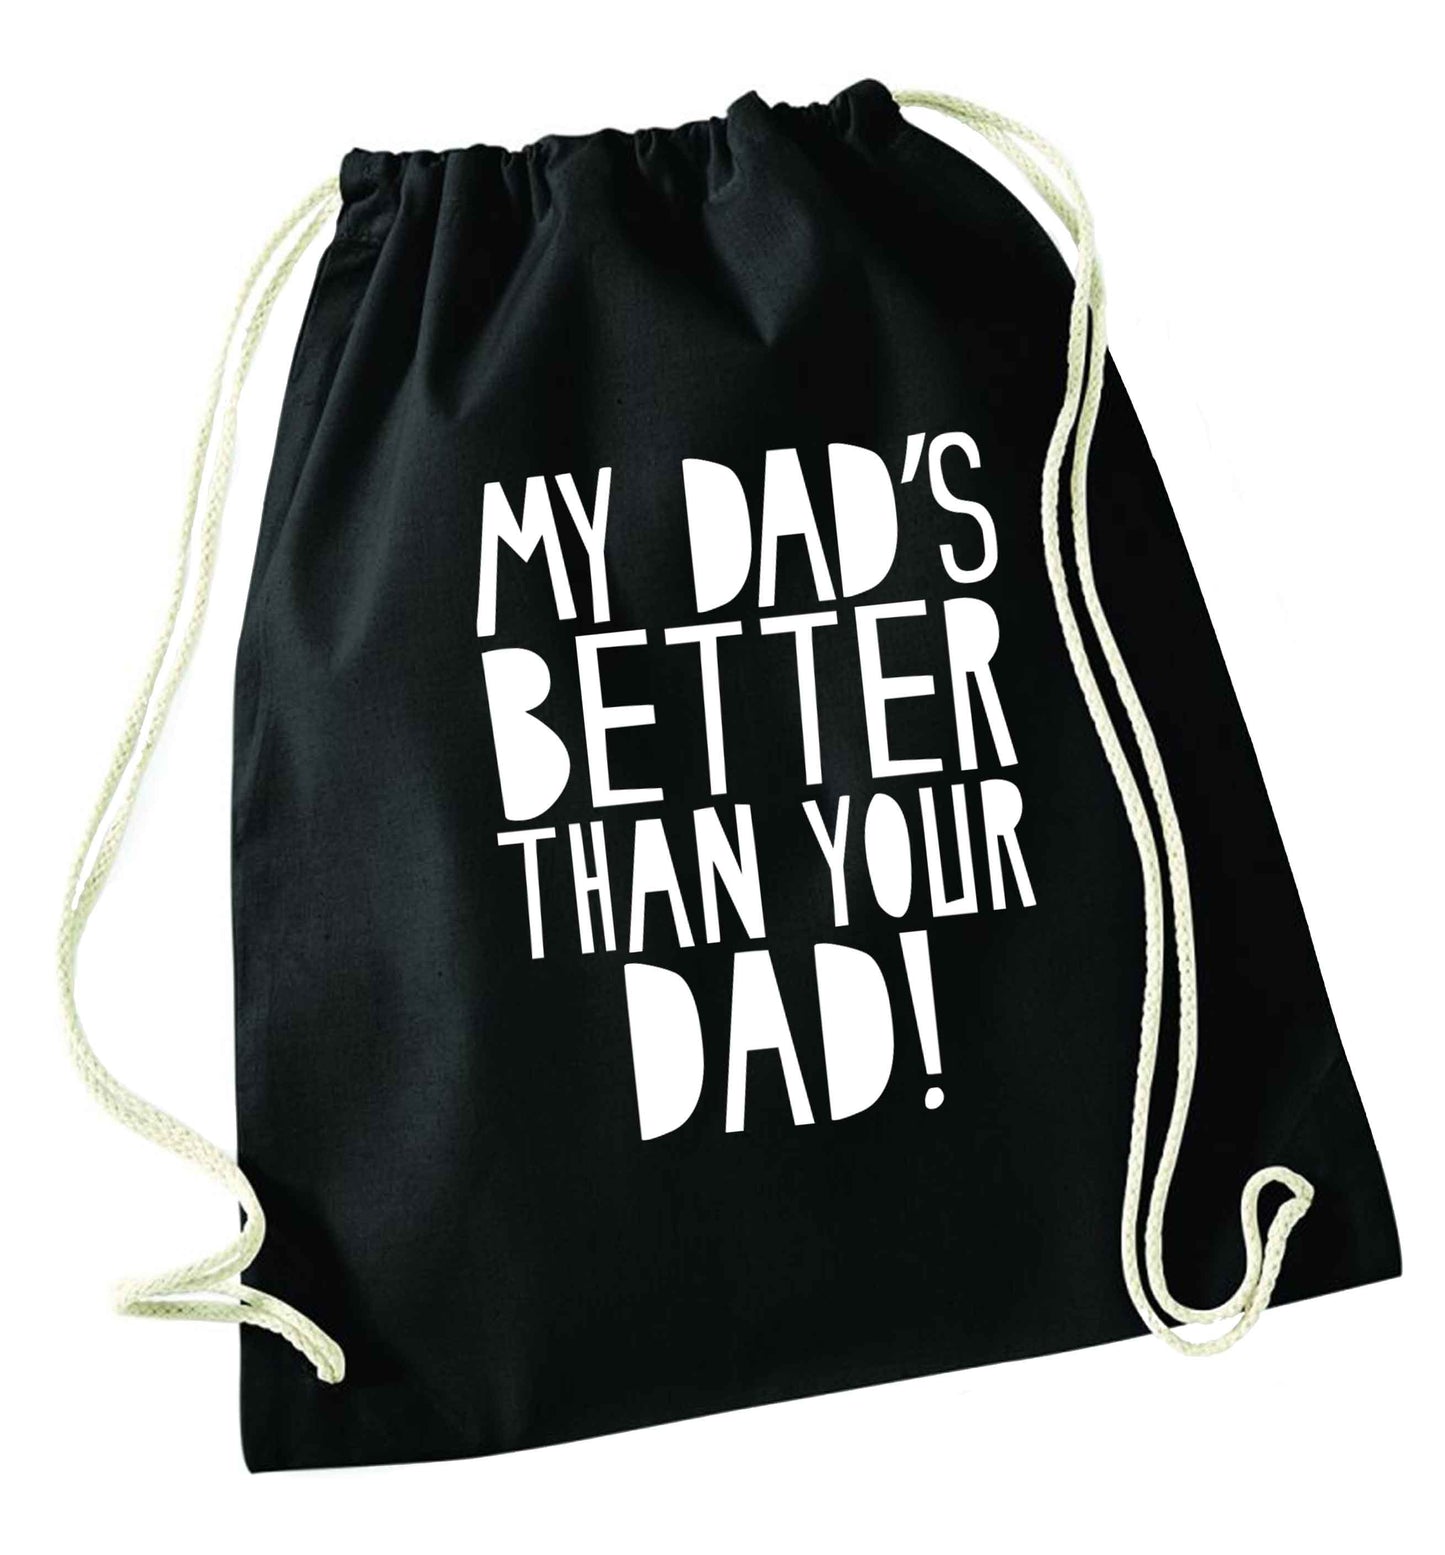 My dad's better than your dad! black drawstring bag